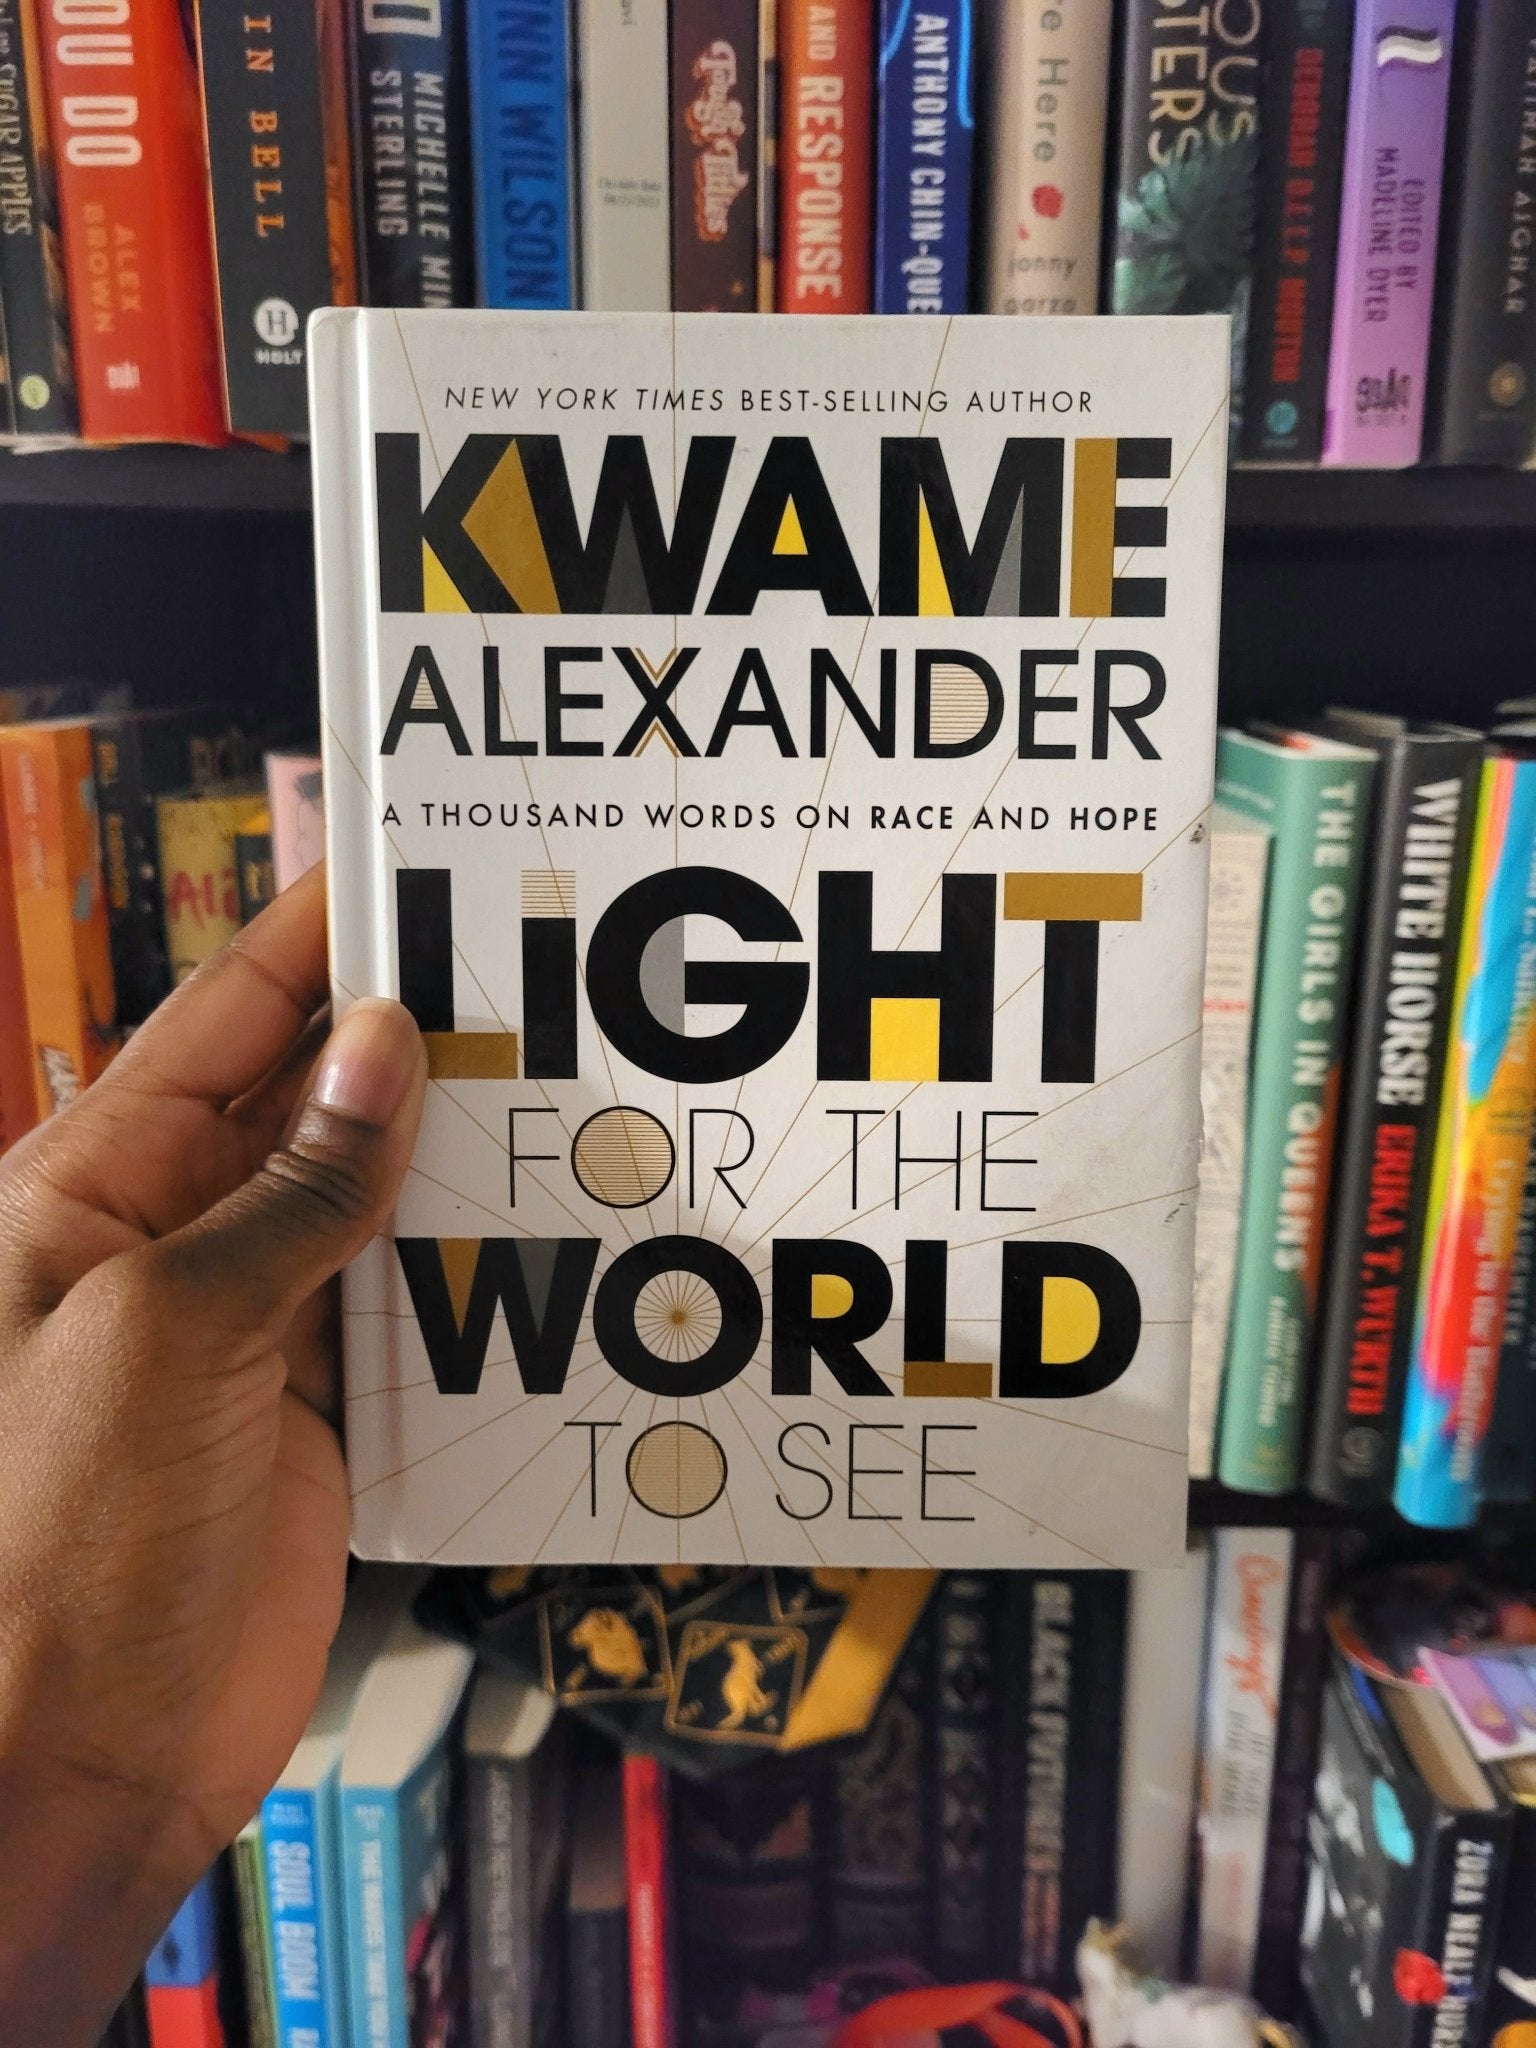 Light For The World To See: A Thousand Words on Race and Hope by Kwame Alexander - 9780358539414 - Tuma's Books - Tuma's Books